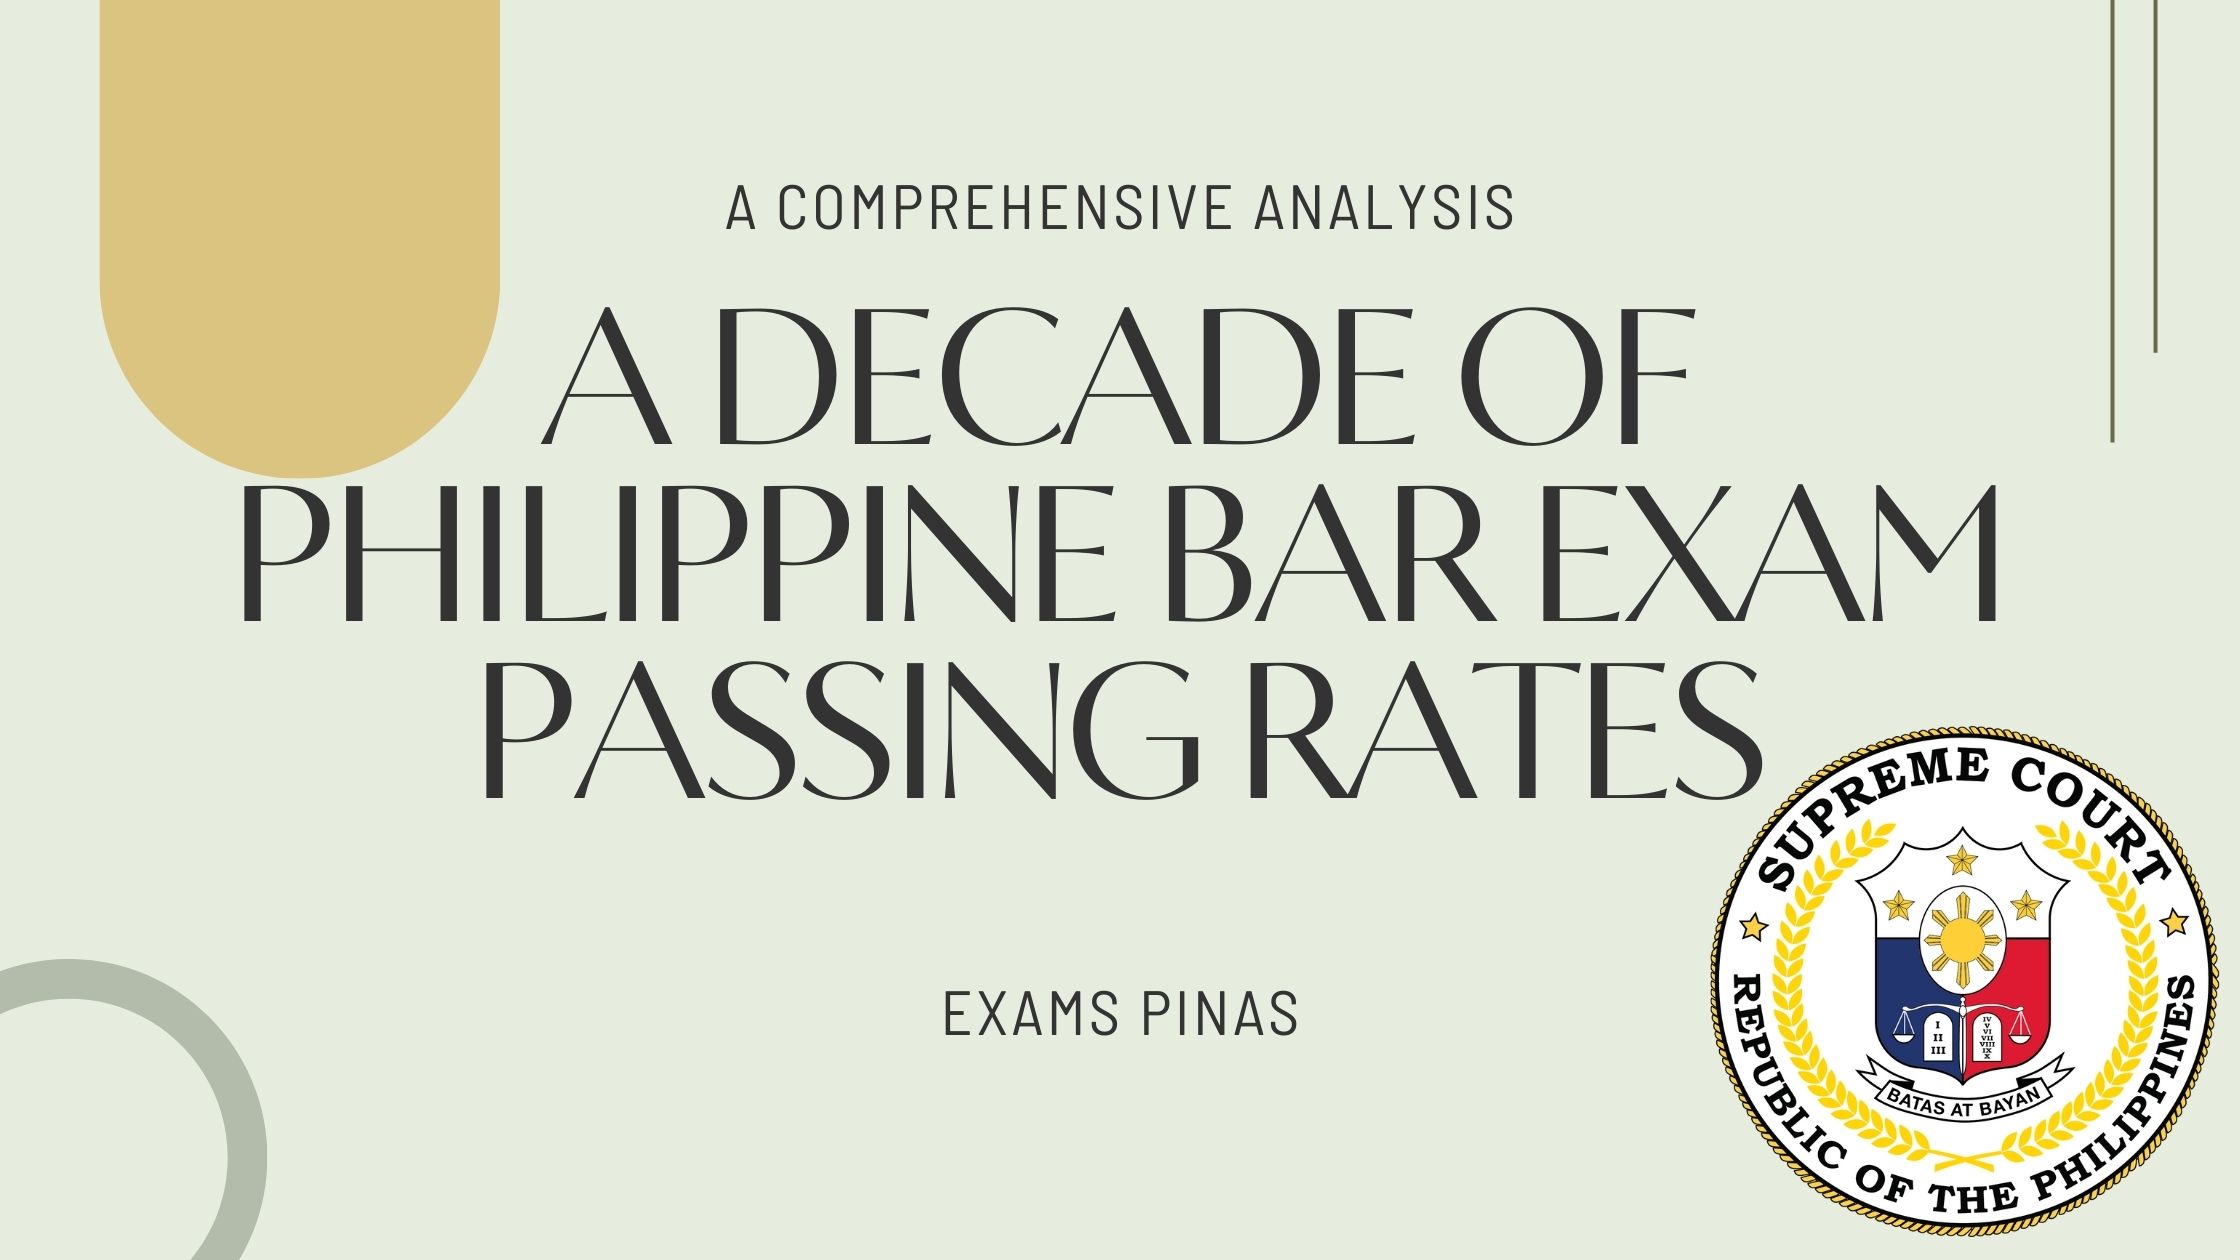 A Decade of Philippine Bar Exam Passing Rates A Comprehensive Analysis